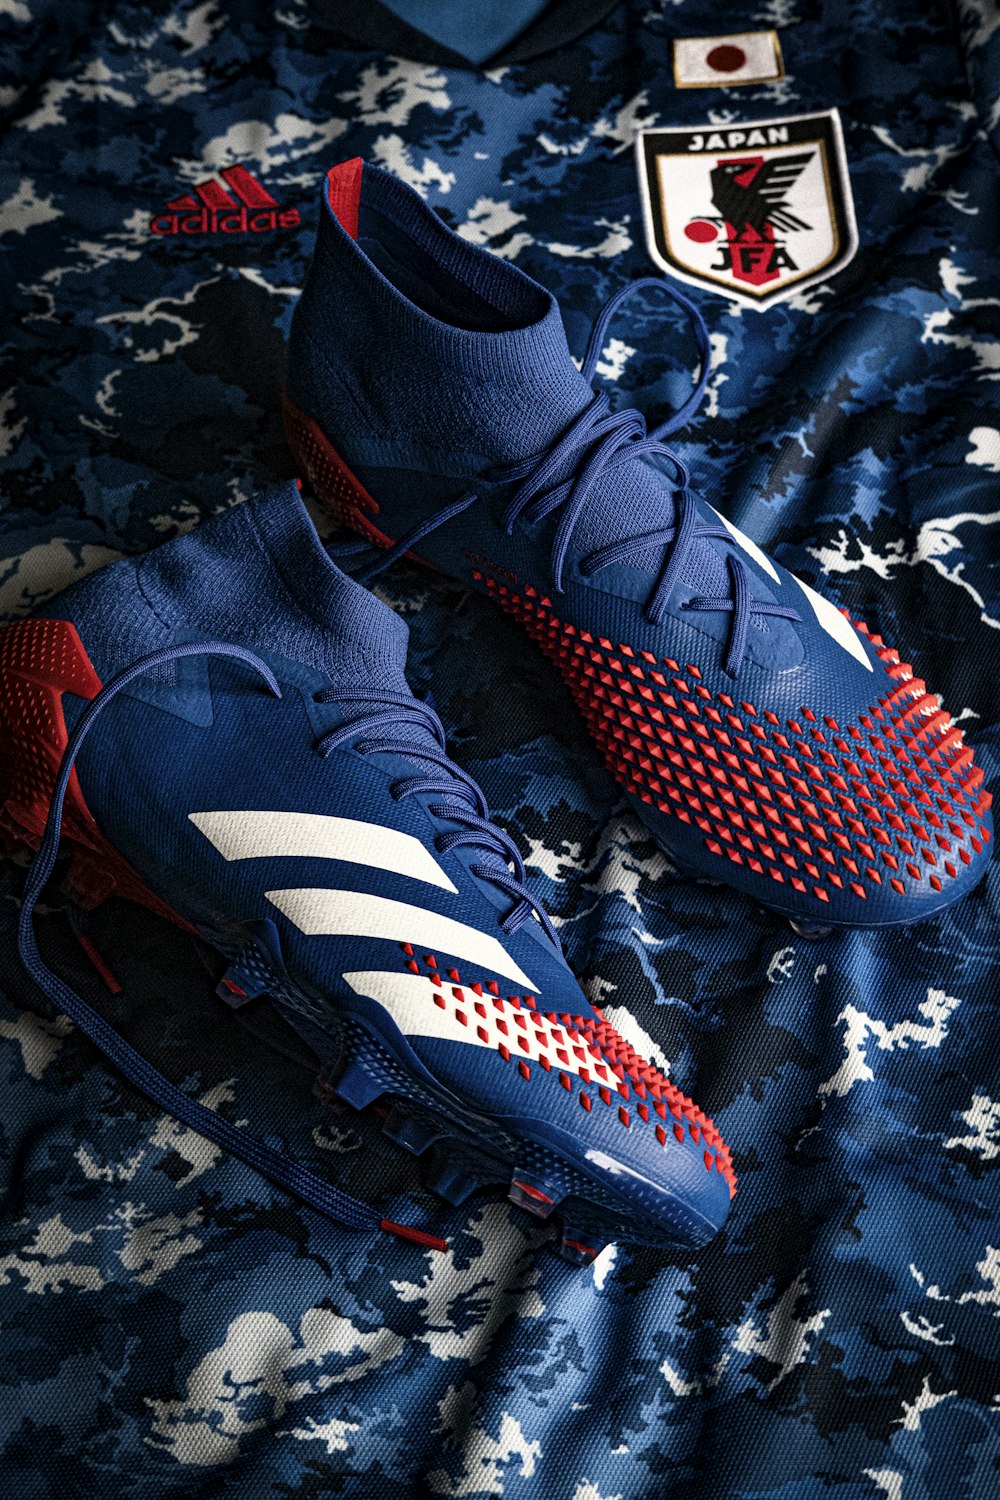 Adidas Football Pictures | Download Free Images on Unsplash